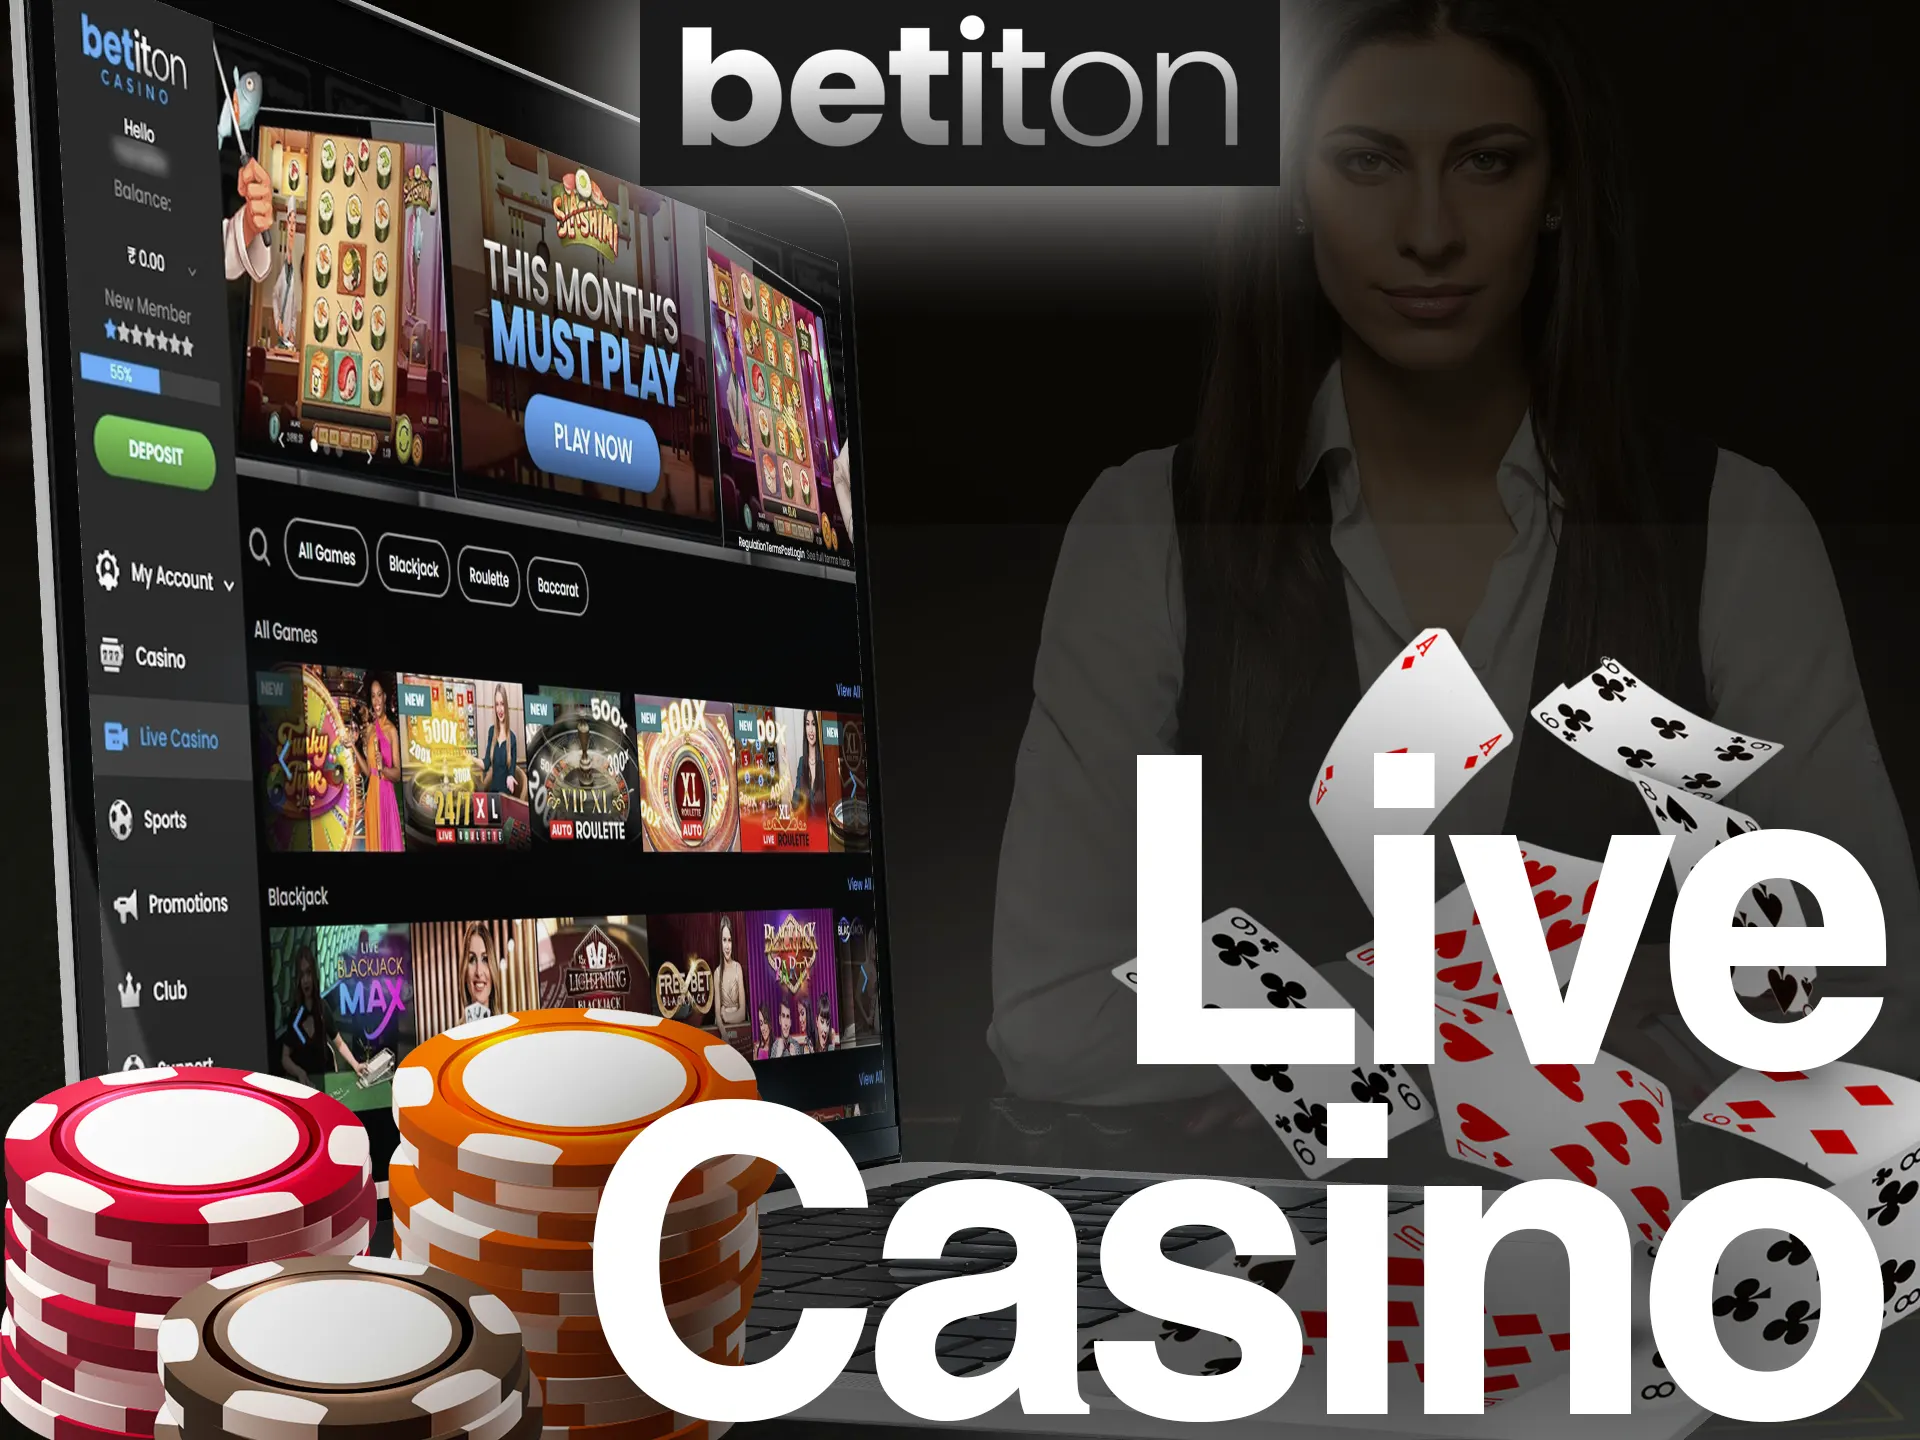 Play Betiton live casino games with real people.